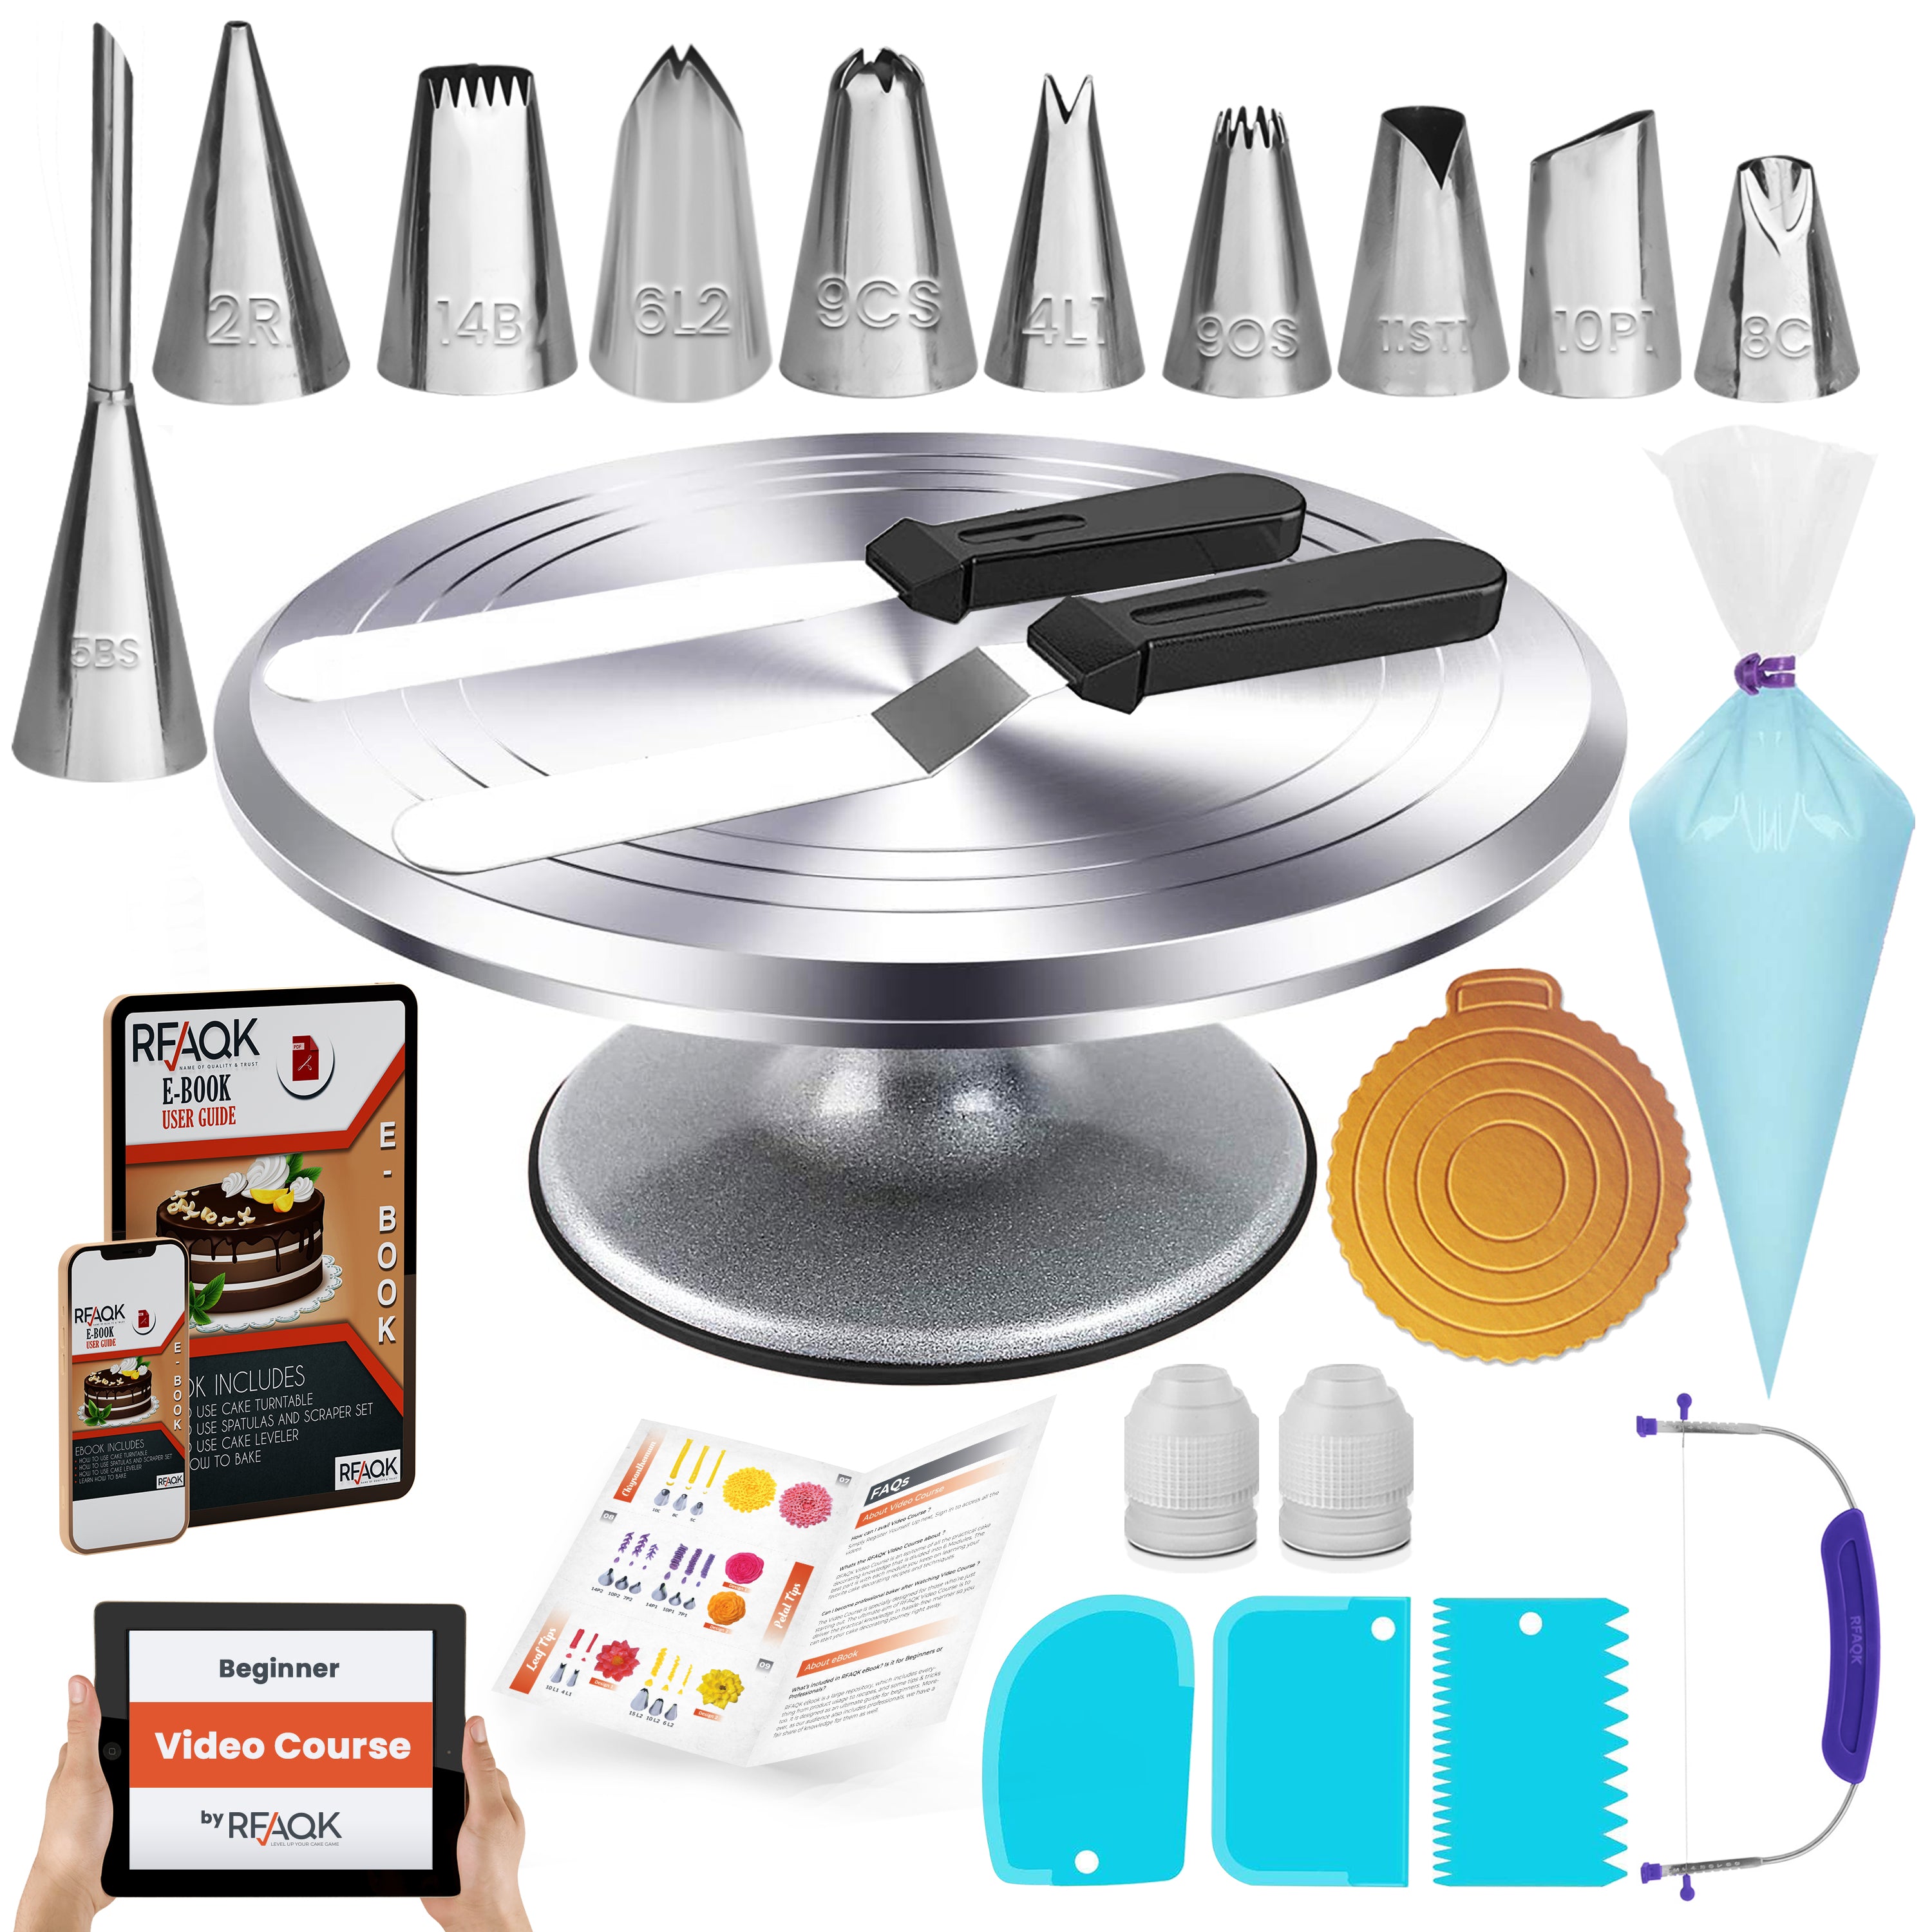 Kootek Cake Decorating Kit Baking Supplies Cake Turntable with 2 Frosting Straight Angled Spatula 3 Icing Smoother Scrapers Baking Accessories Tools